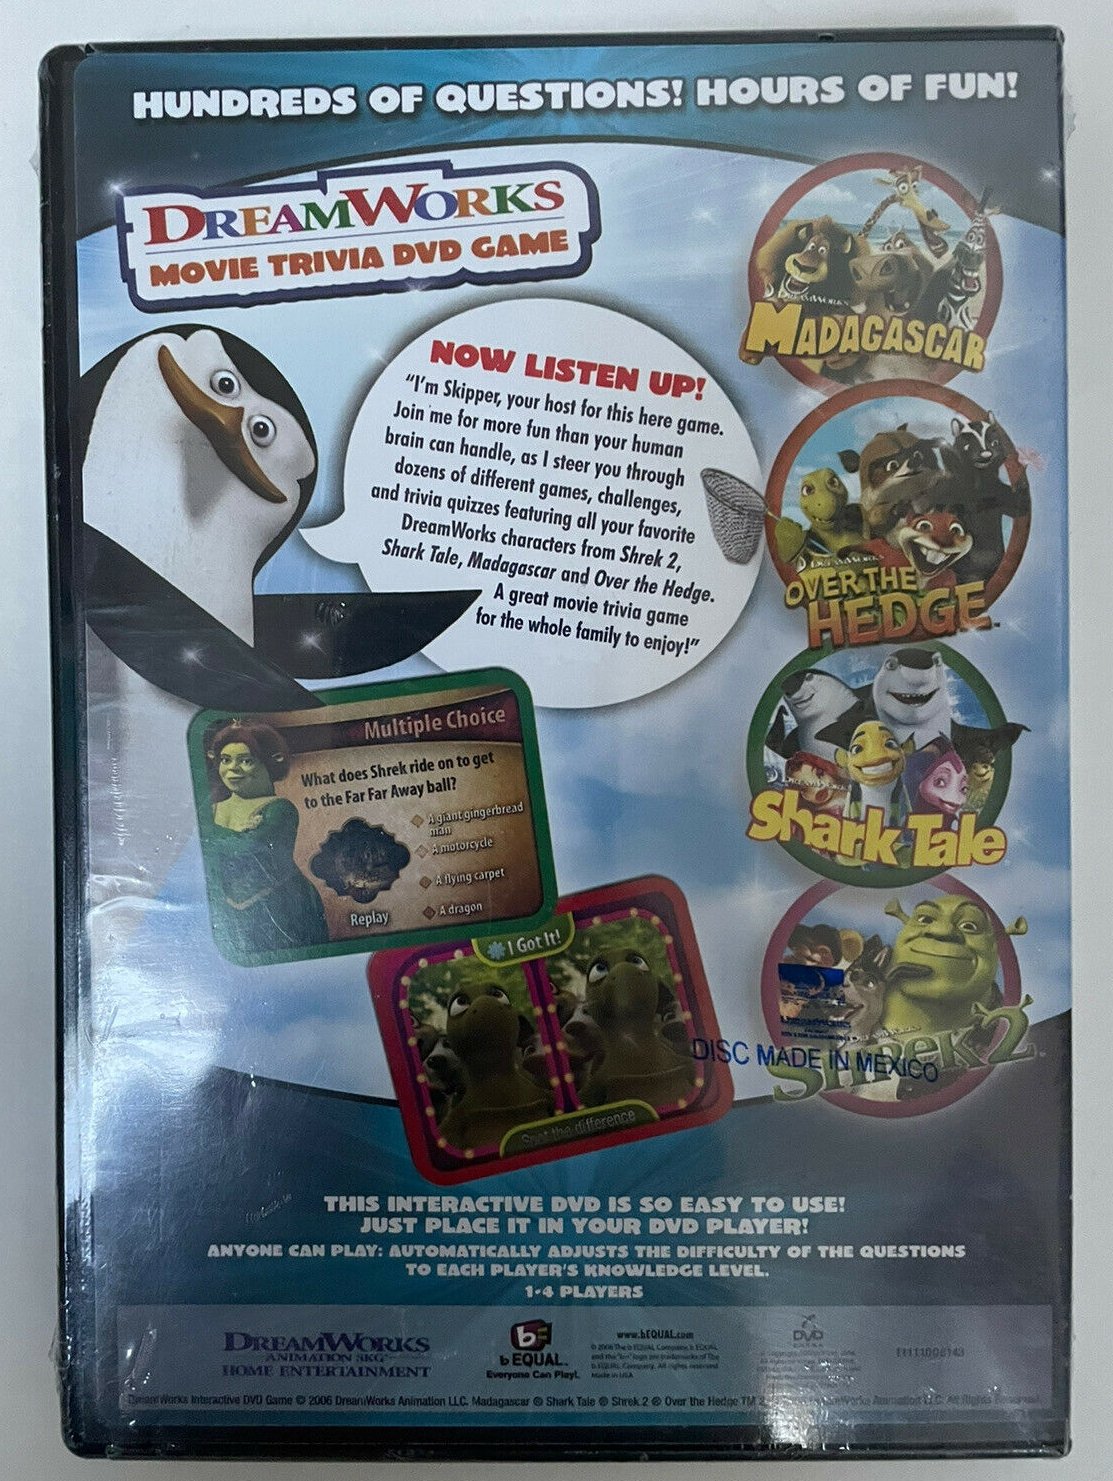 frio posición arrojar polvo en los ojos Rare & Obscure Home Media Releases on Twitter: "DreamWorks Movie Trivia DVD  Game (DVD, 2006) Bundled with selected copies of Over the Hedge on DVD,  this DVD game has various trivia questions